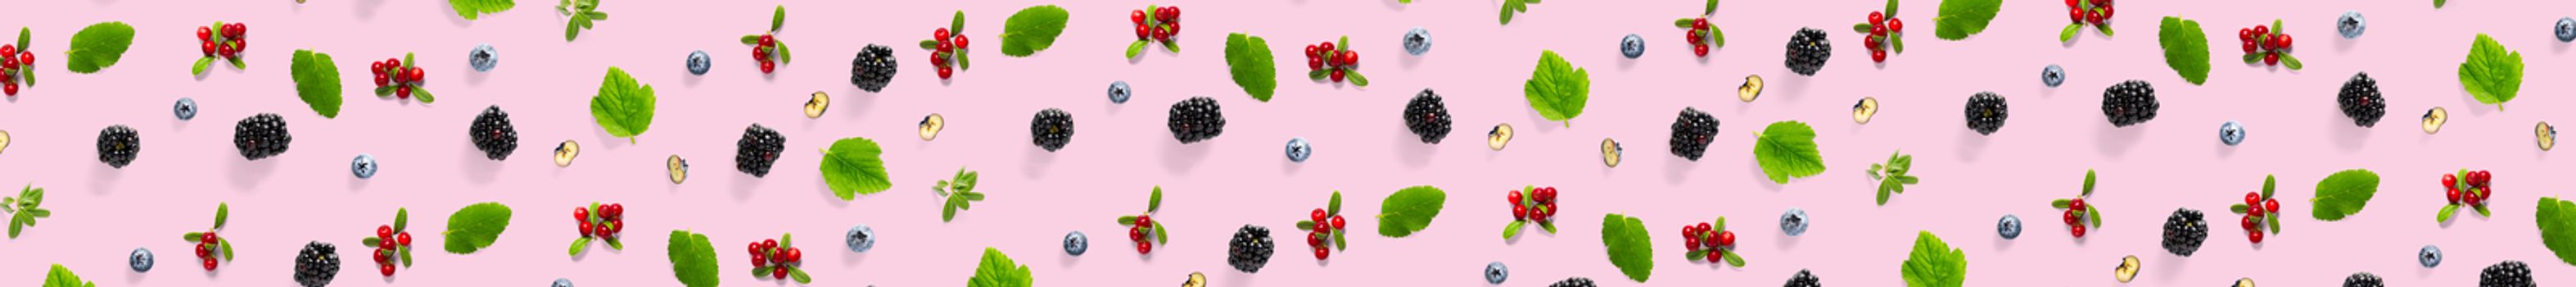 Creative set of wild berries, blackberry, blueberry, lingonberry and bramble. modern banner background on pink backdrop made from autumn forest wild berries. Forest berries mix